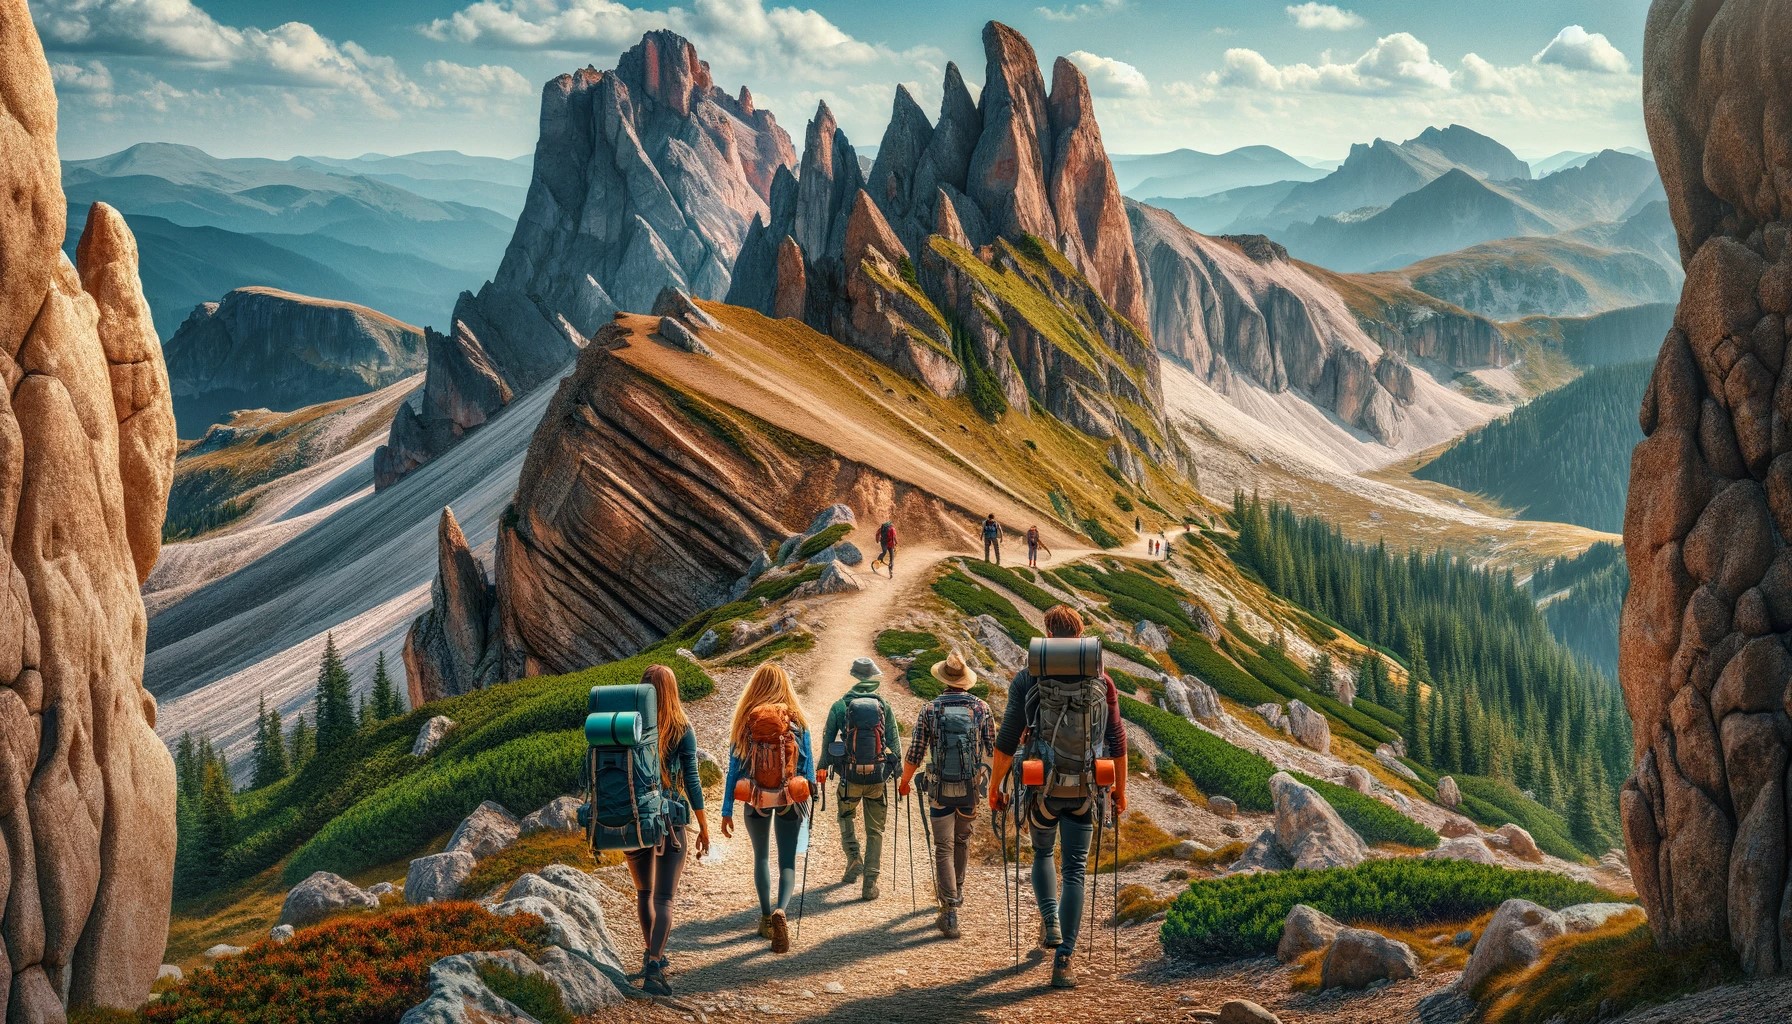 A scenic mountain landscape with a group of hikers, including both females and males, equipped for both hiking and rock climbing. They are on a trail